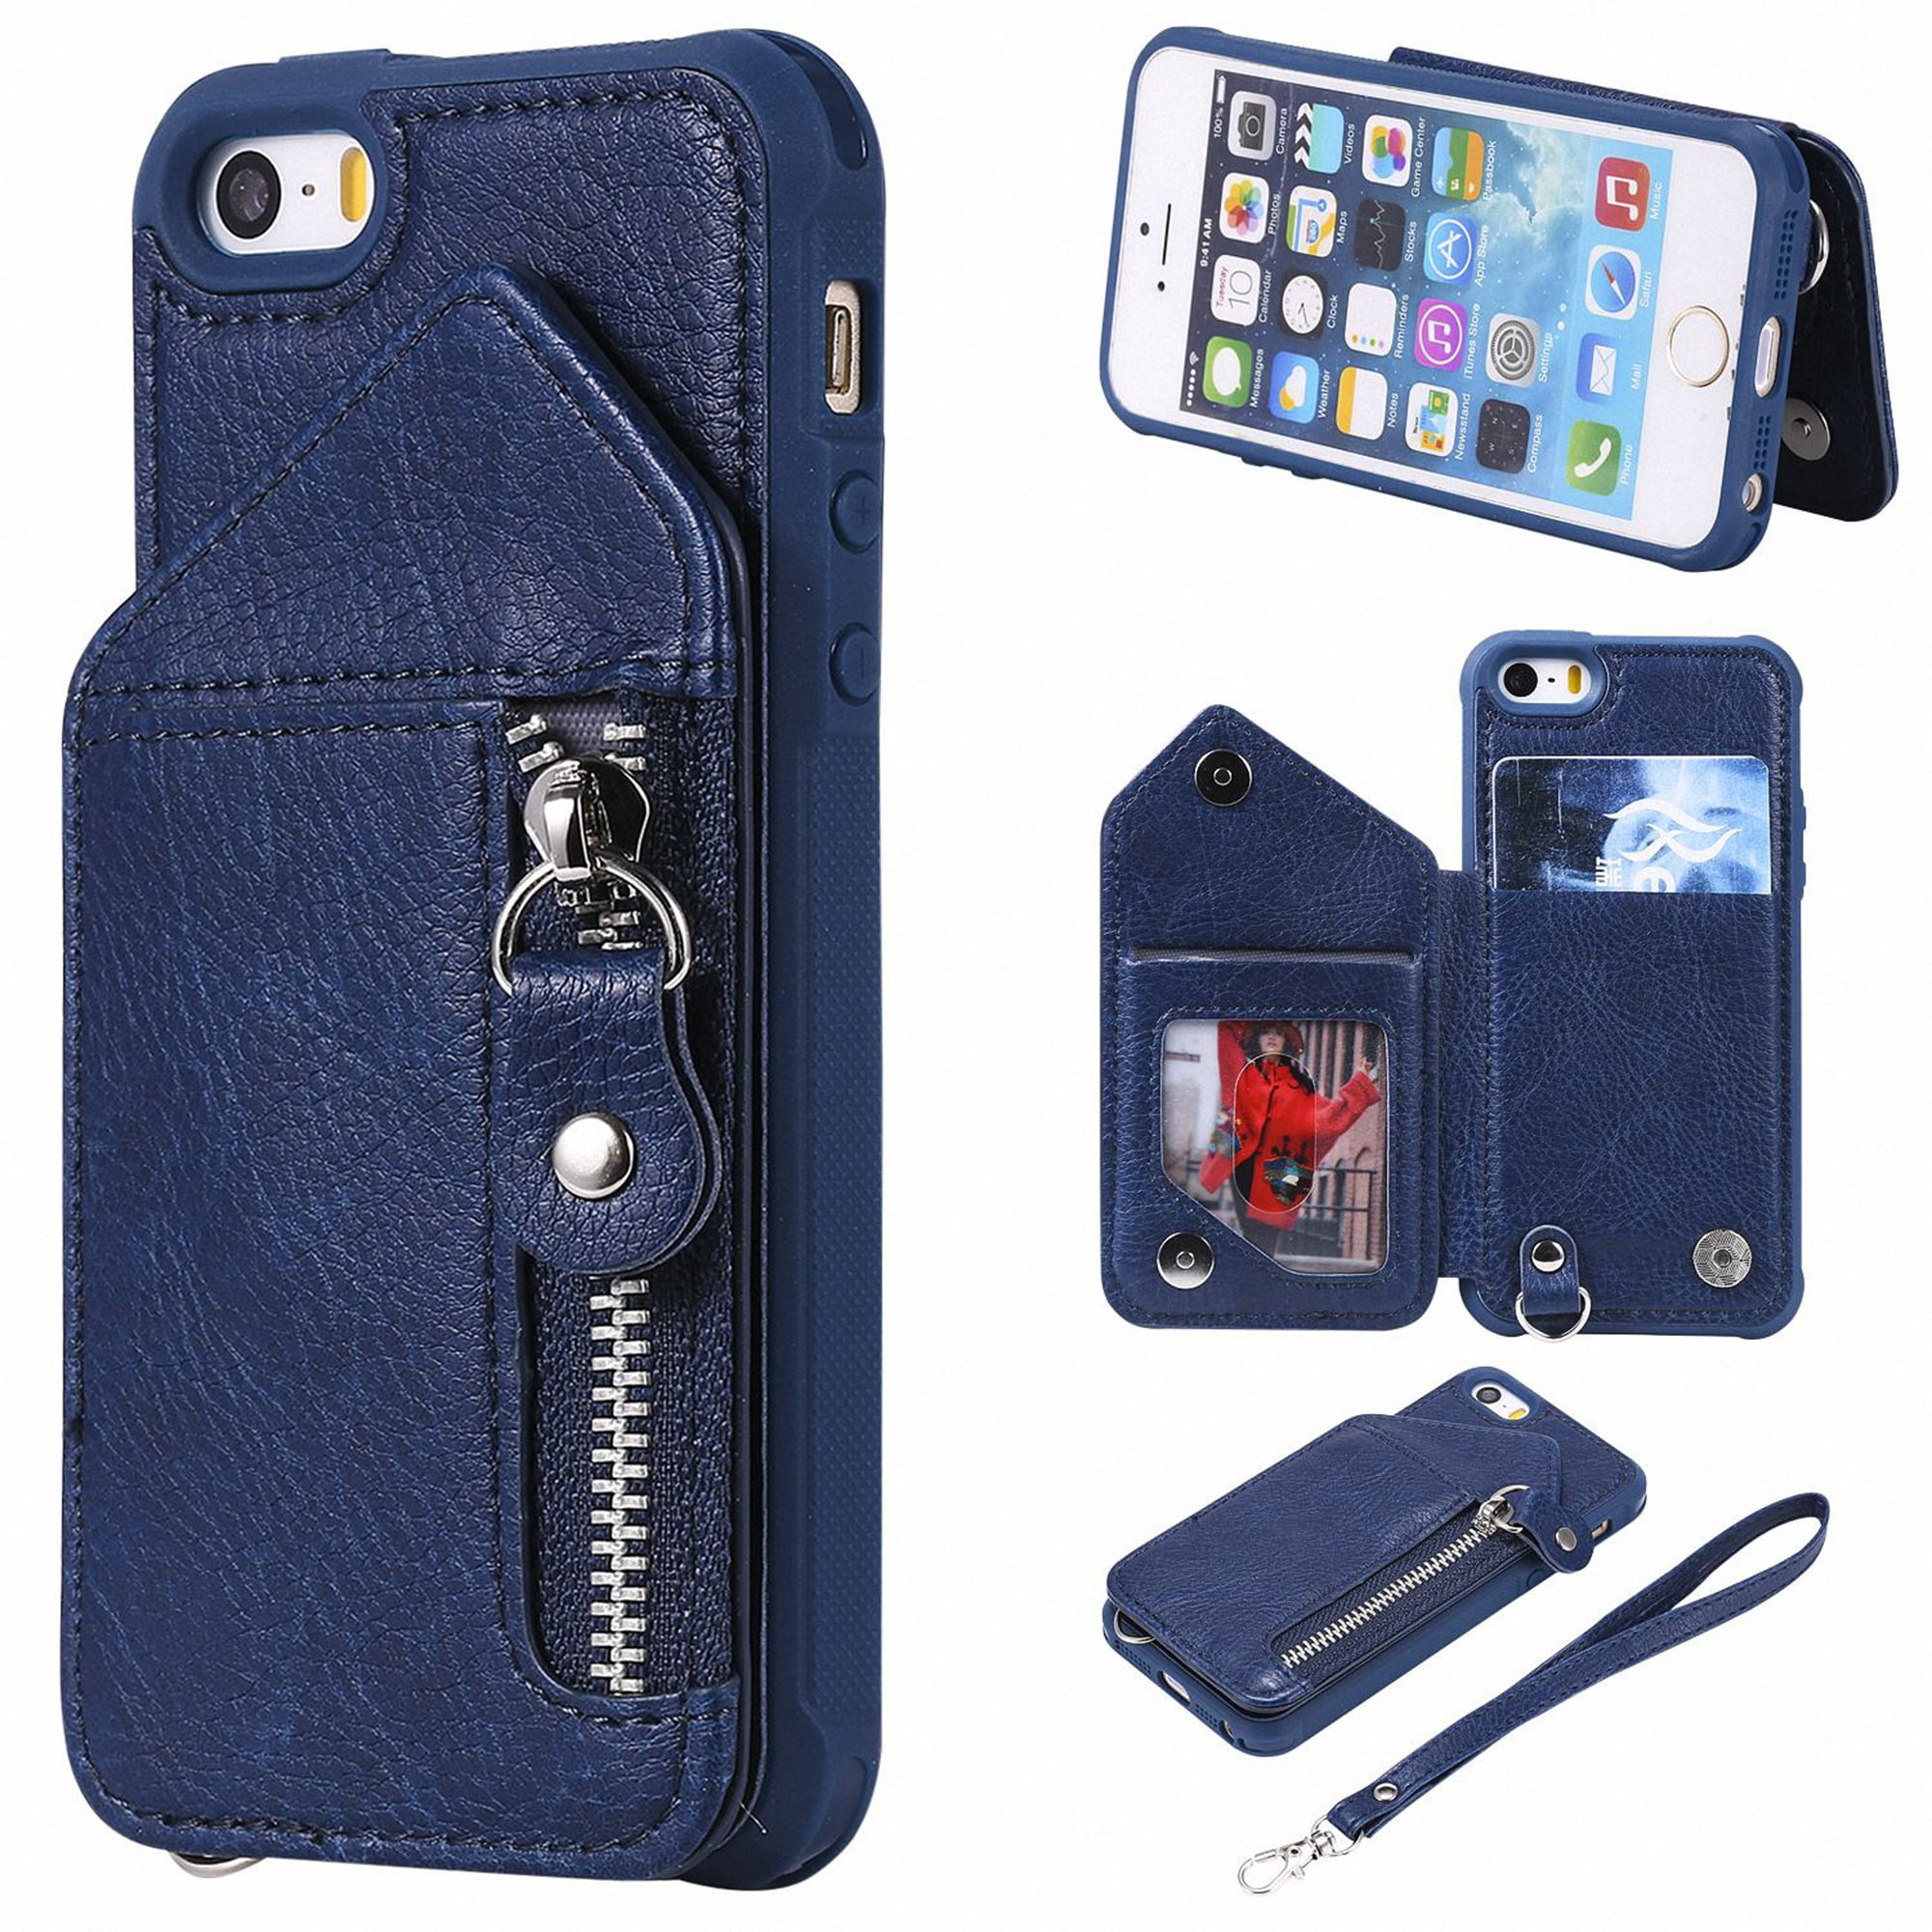 iPhone (1st Gen 2016) (not fit SE 2020), iPhone 5 5S Case, Dteck PU Leather Zipper Wallet Kickstand Case Protective Cover With Card Slots, Blue - Walmart.com